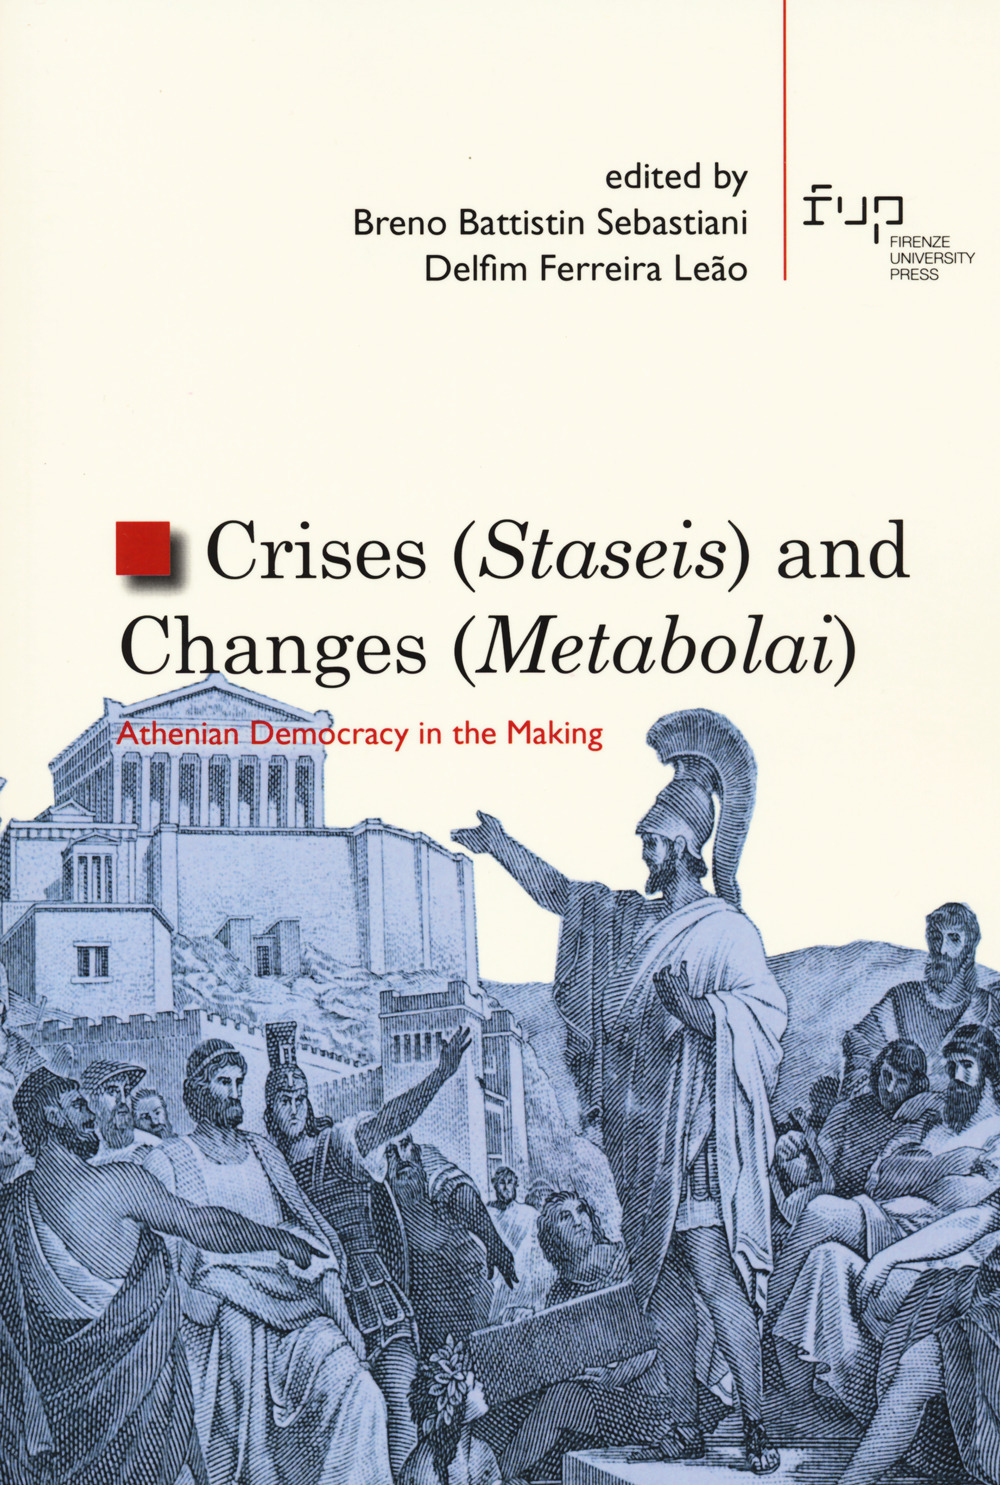 Crises (staseis) and changes (metabolai). Athenian democracy in the making